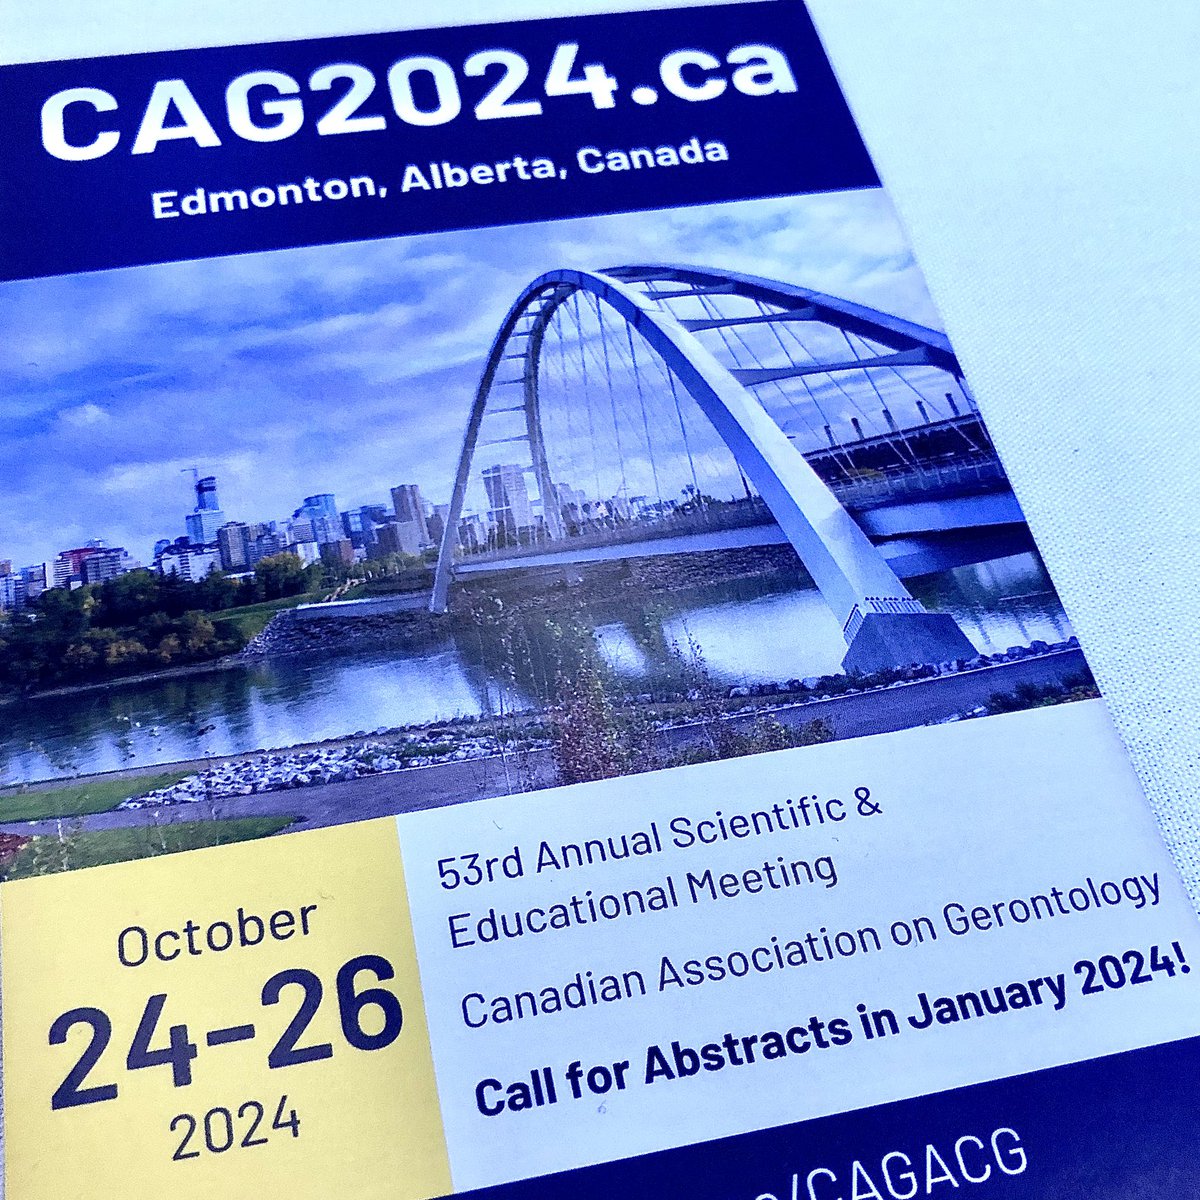 Thank you to 850+ delegates for making the #CAG_2023 conference a success, and congrats to @jazzfiocco for organizing the exciting program of #gerontology in Canada and abroad. @cagacg and @SC_CAG look forward to seeing you in Edmonton for #CAG_2024 chaired by @StephCham11!